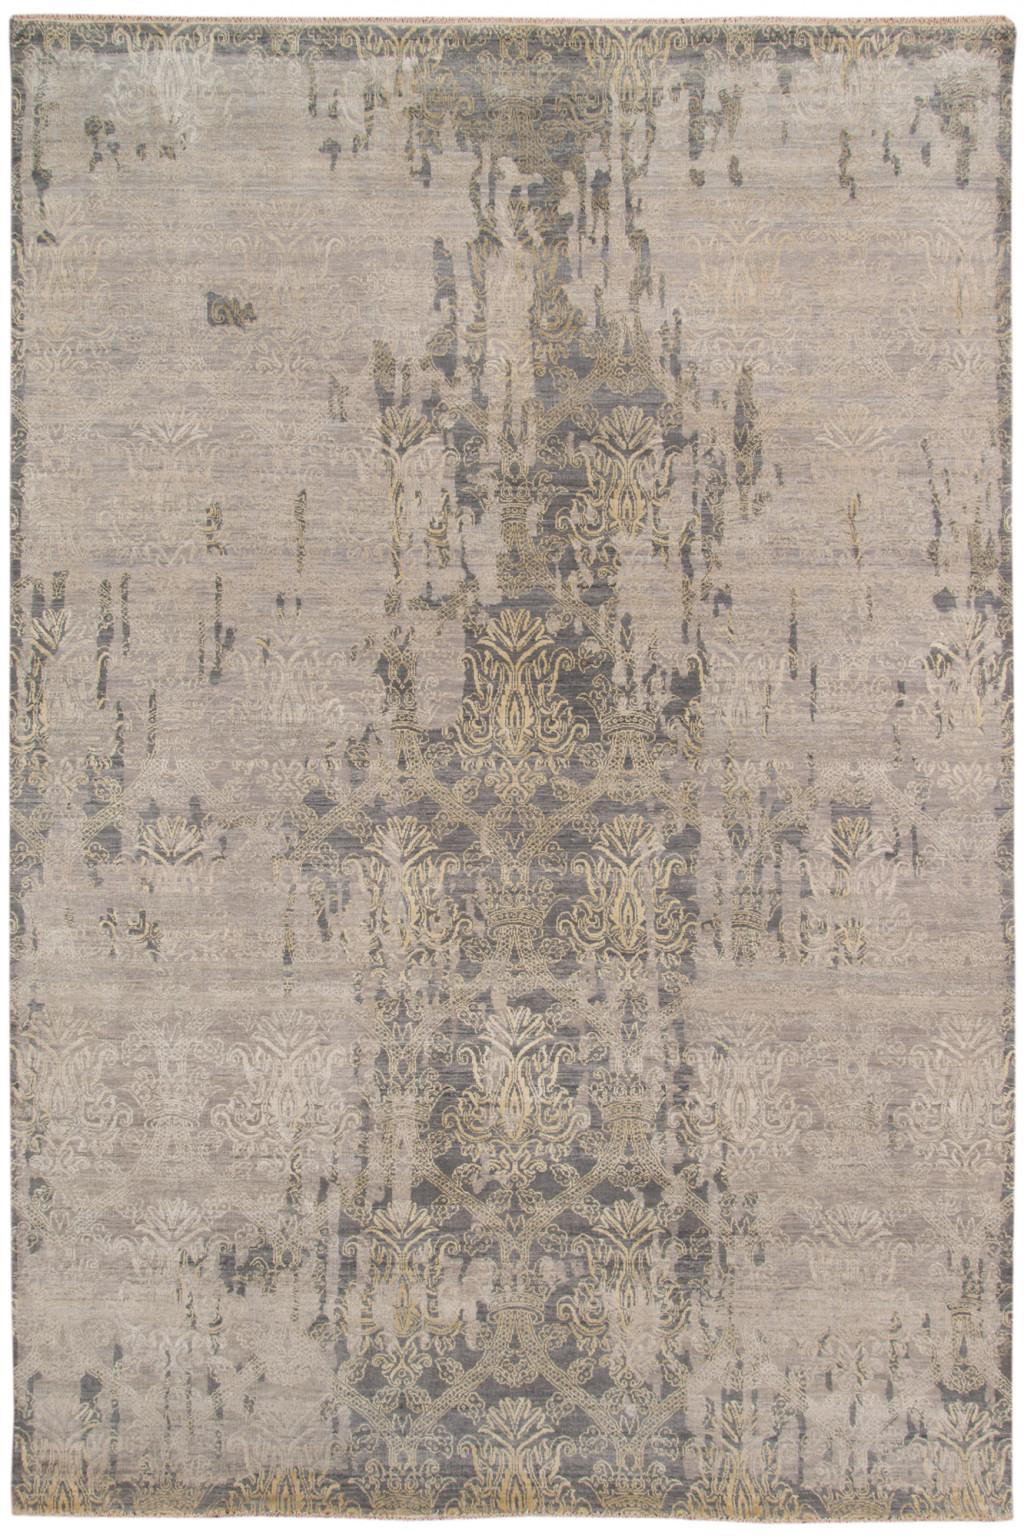 8' X 10' Gray Pearl New Zealand Lambs Wool Damask Distressed Area Rug With Fringe Default Title